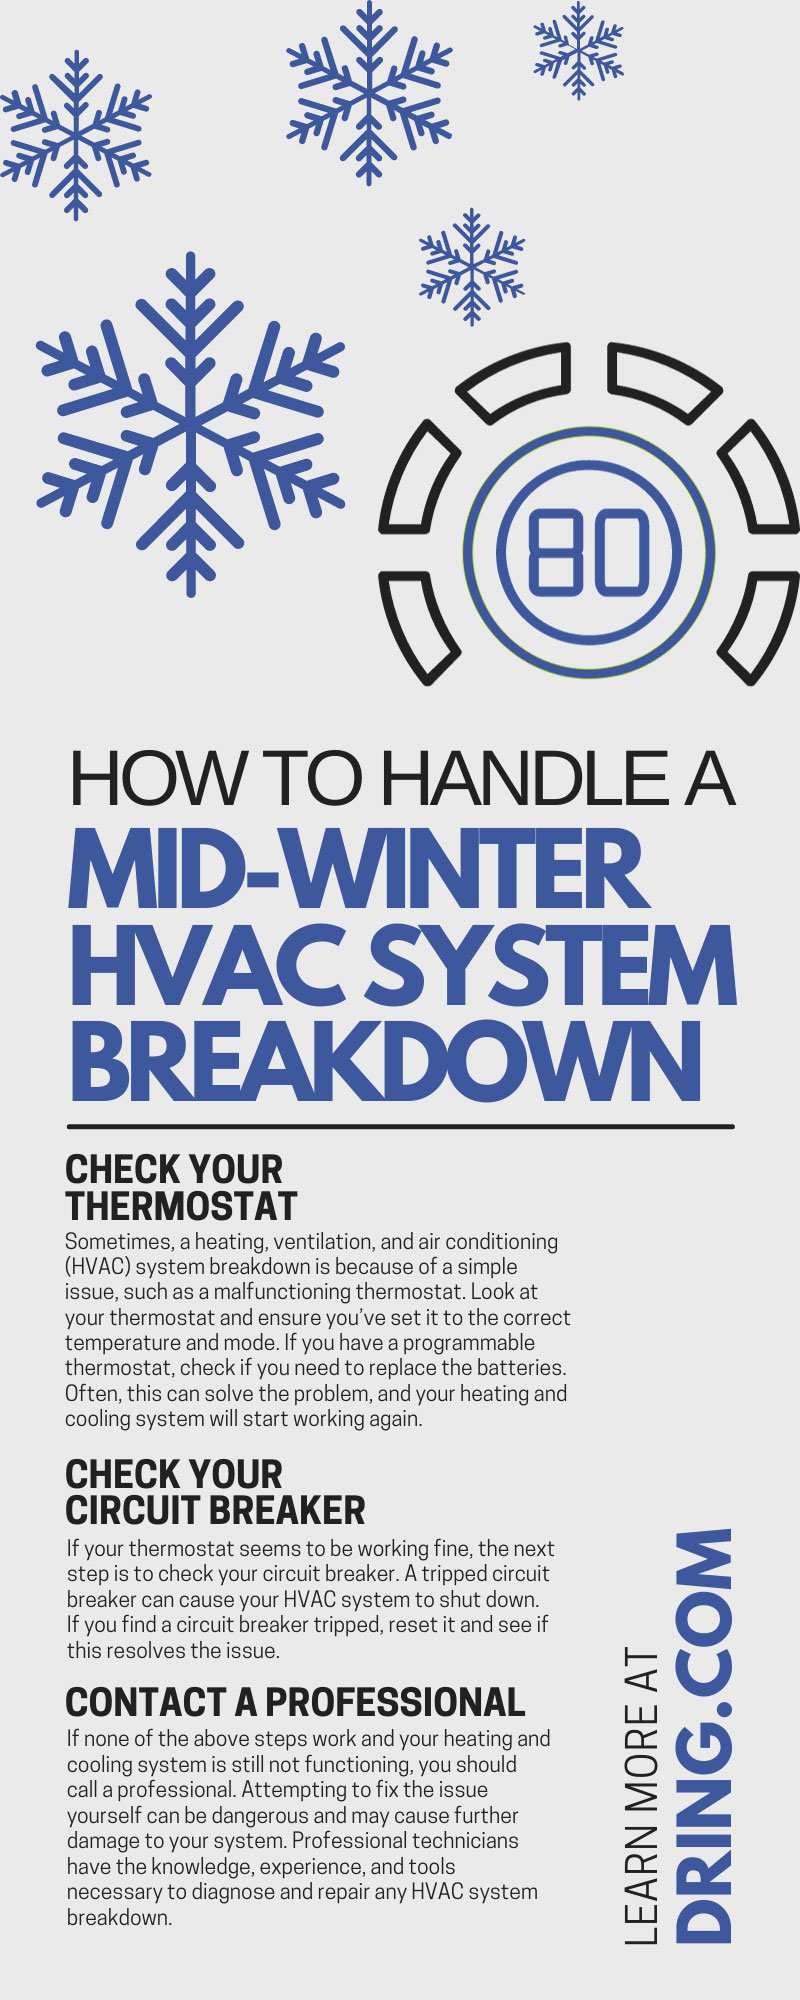 How To Handle a Mid-Winter HVAC System Breakdown